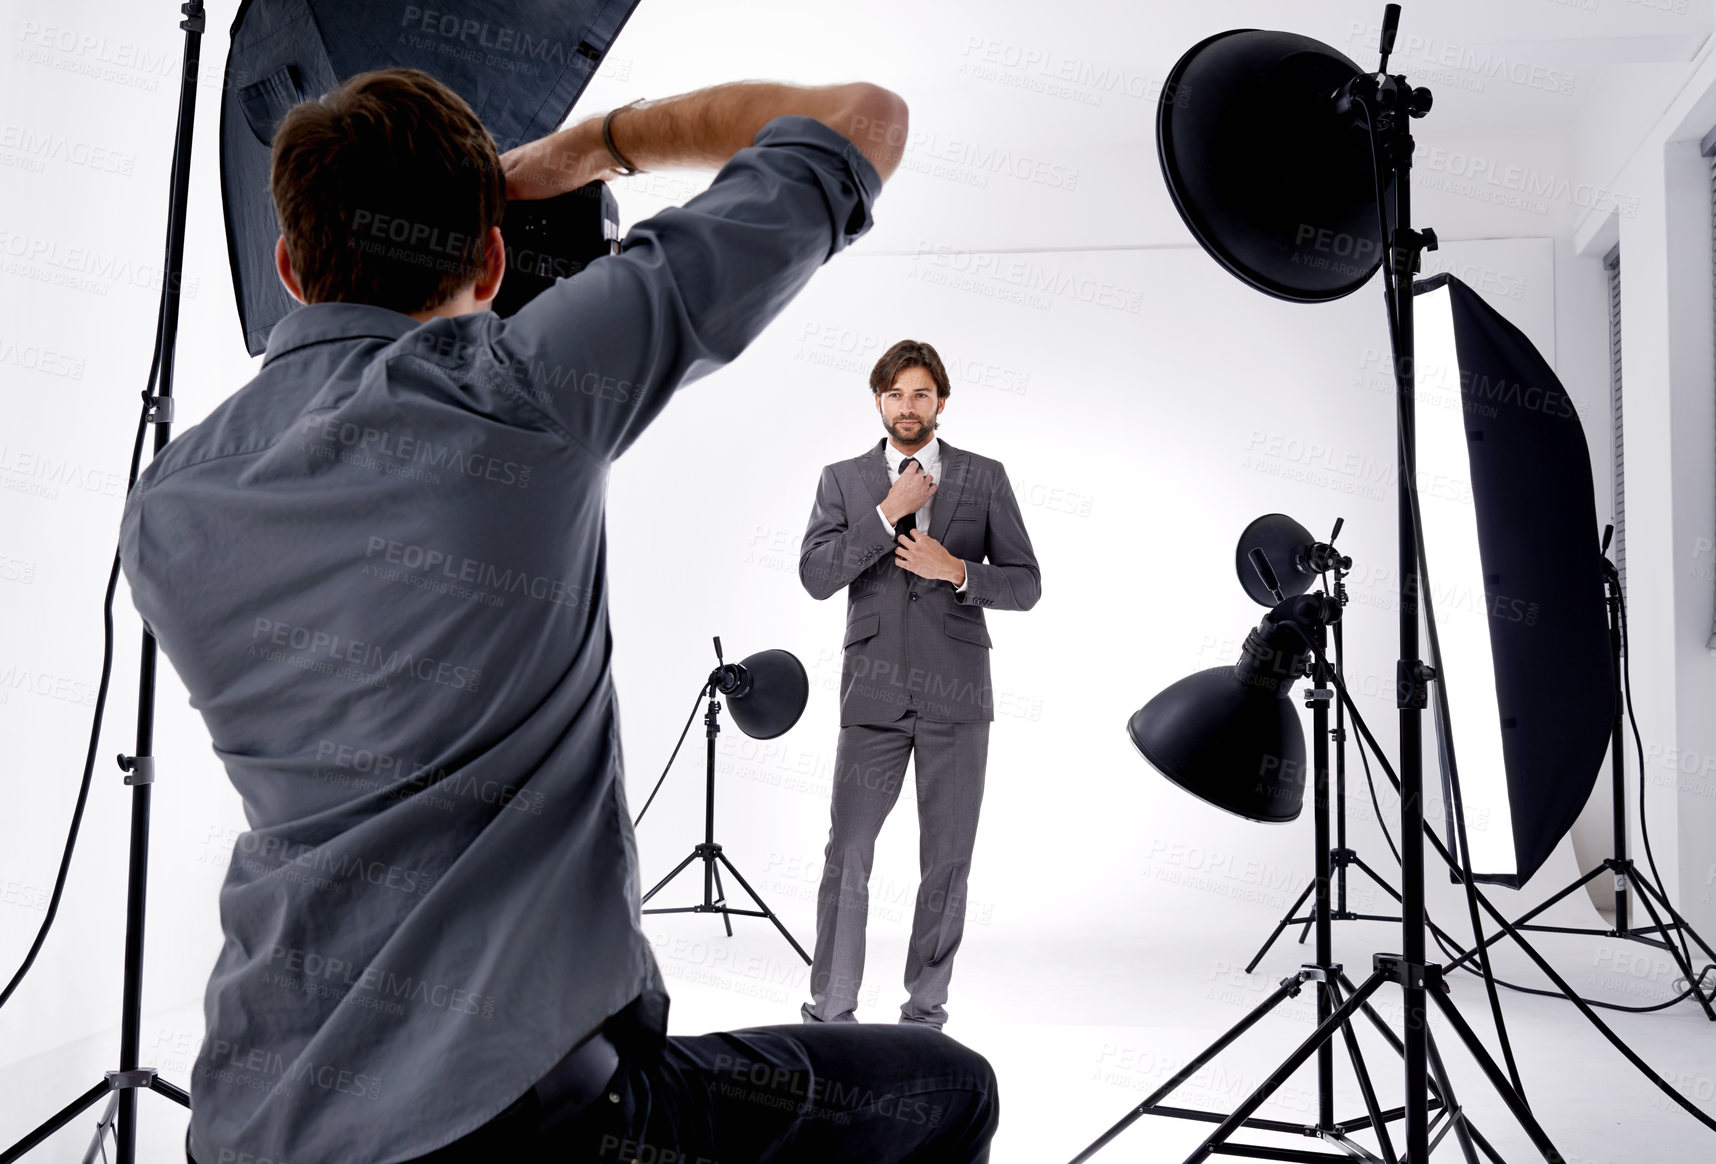 Buy stock photo Shot of a photographer working in his studio